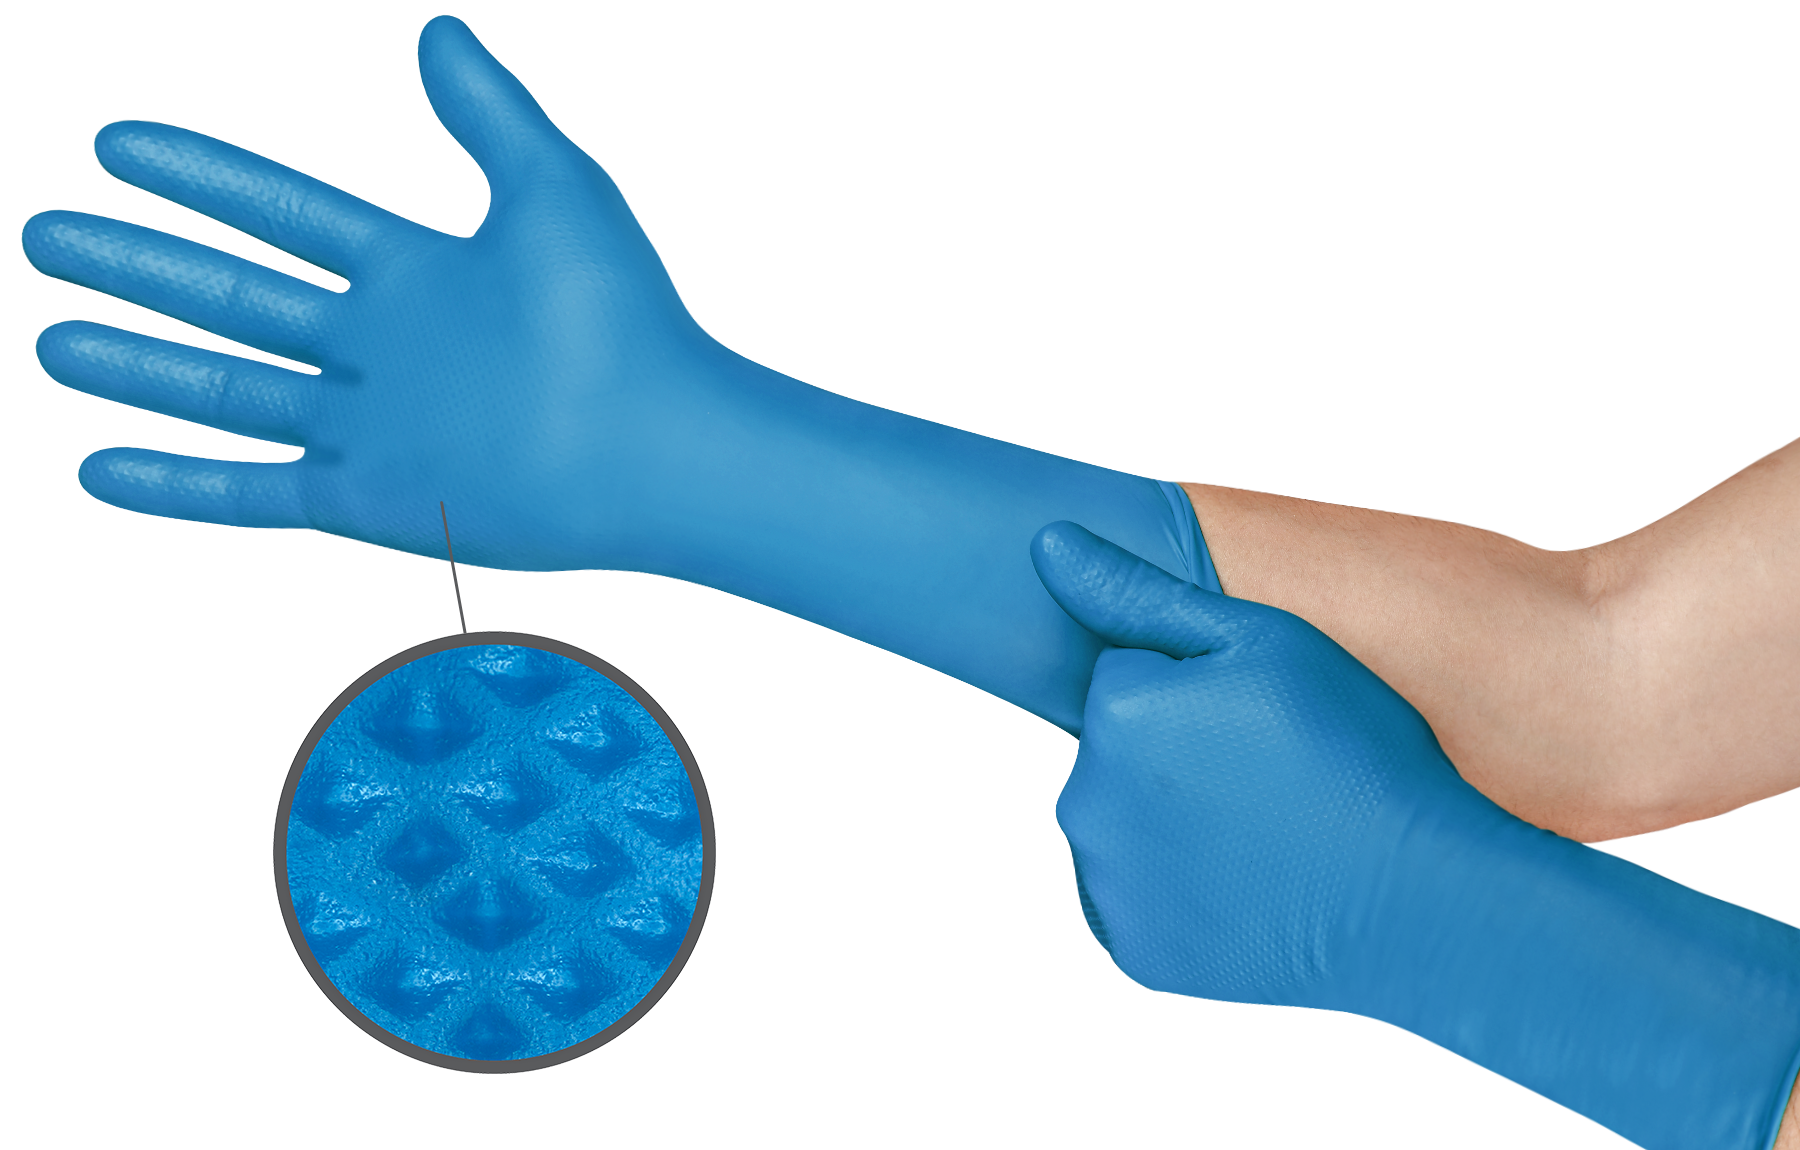 Microflex 93283090 93-283 Series Disposable Gloves, Large, Nitrile, 8.7-mil, Powder-Free, Blue - MPR Tools & Equipment